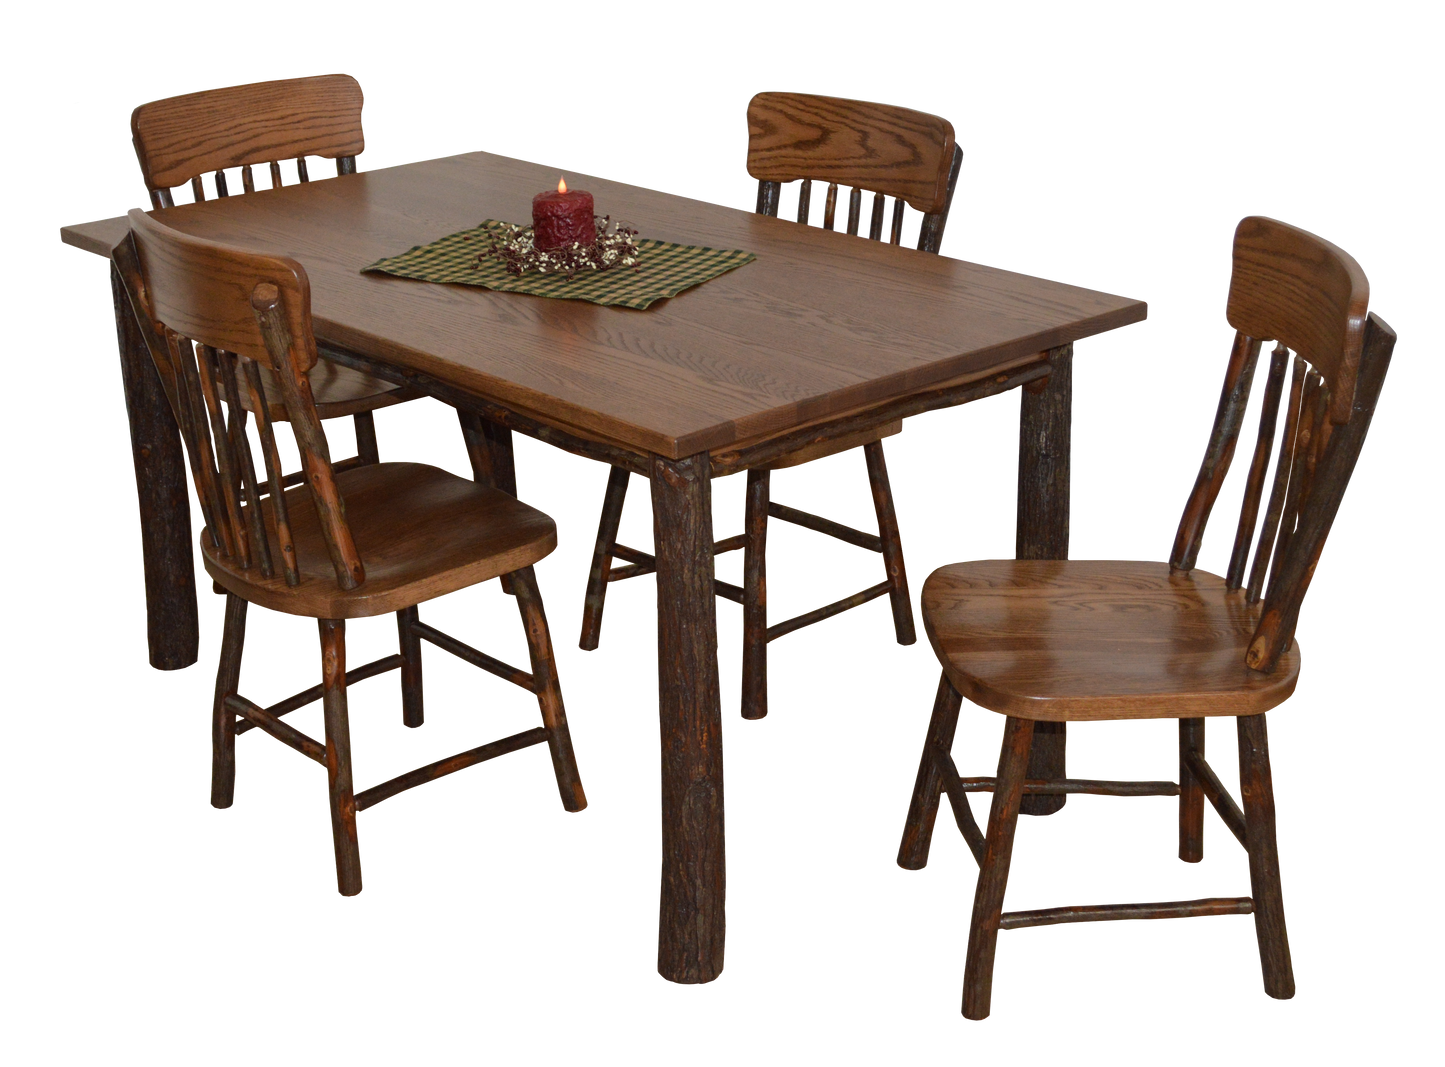 A&L Furniture Co. Hickory 5 Piece Farm Table Dining Set - LEAD TIME TO SHIP 10 BUSINESS DAYS